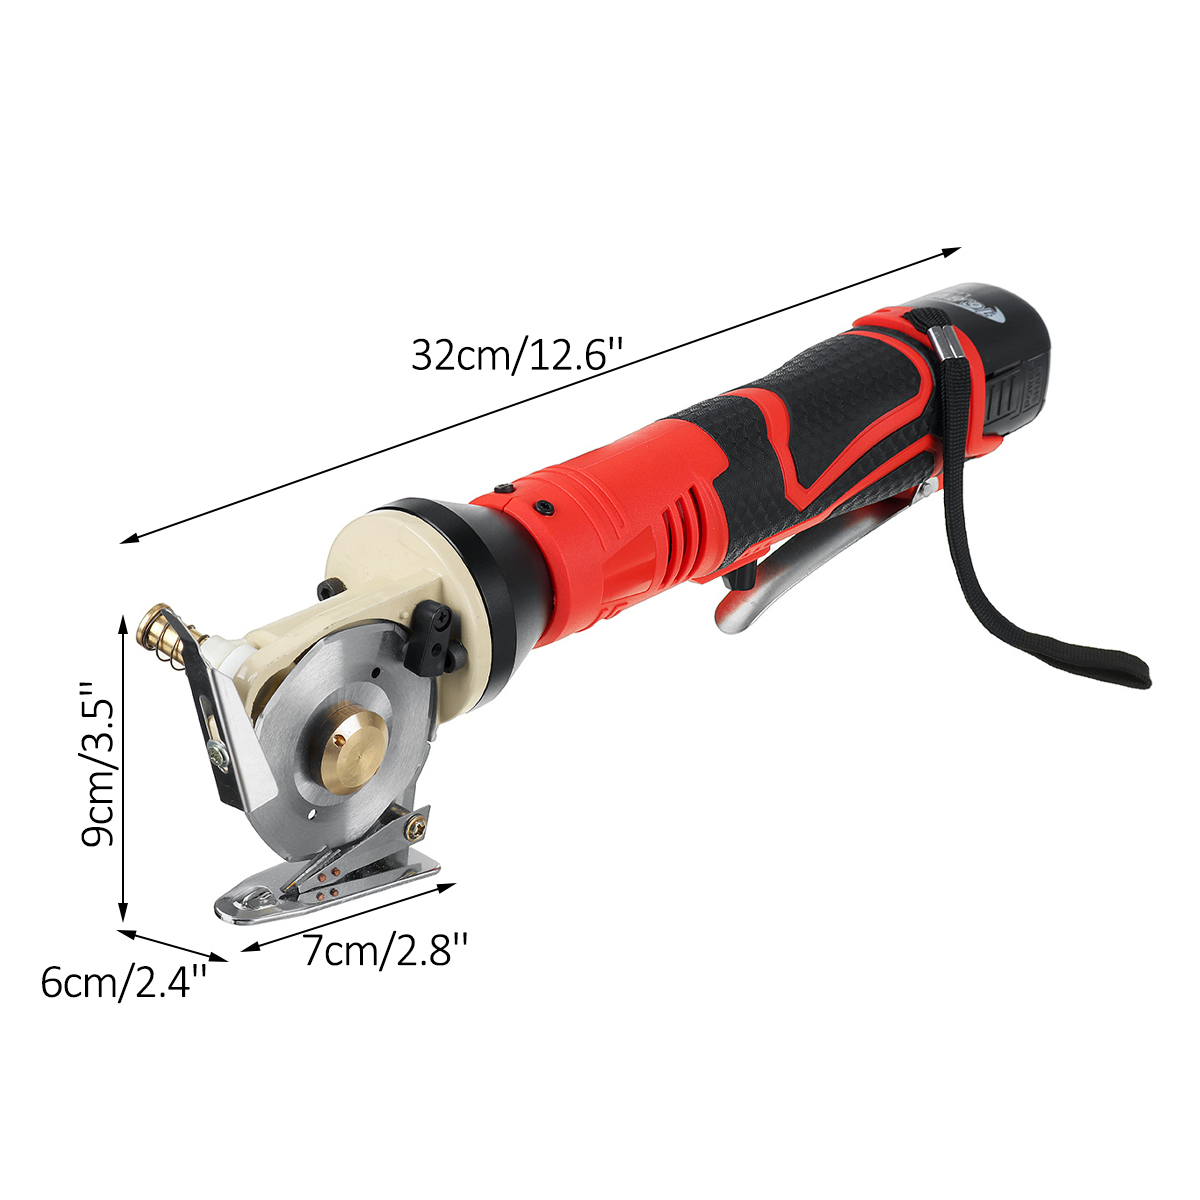 Cordless-Rechargeable-Electric-Cloth-Fabric-Cutting-Tools-Leather-Blanket-Electric-Cutter-Saws-Machi-1868912-6